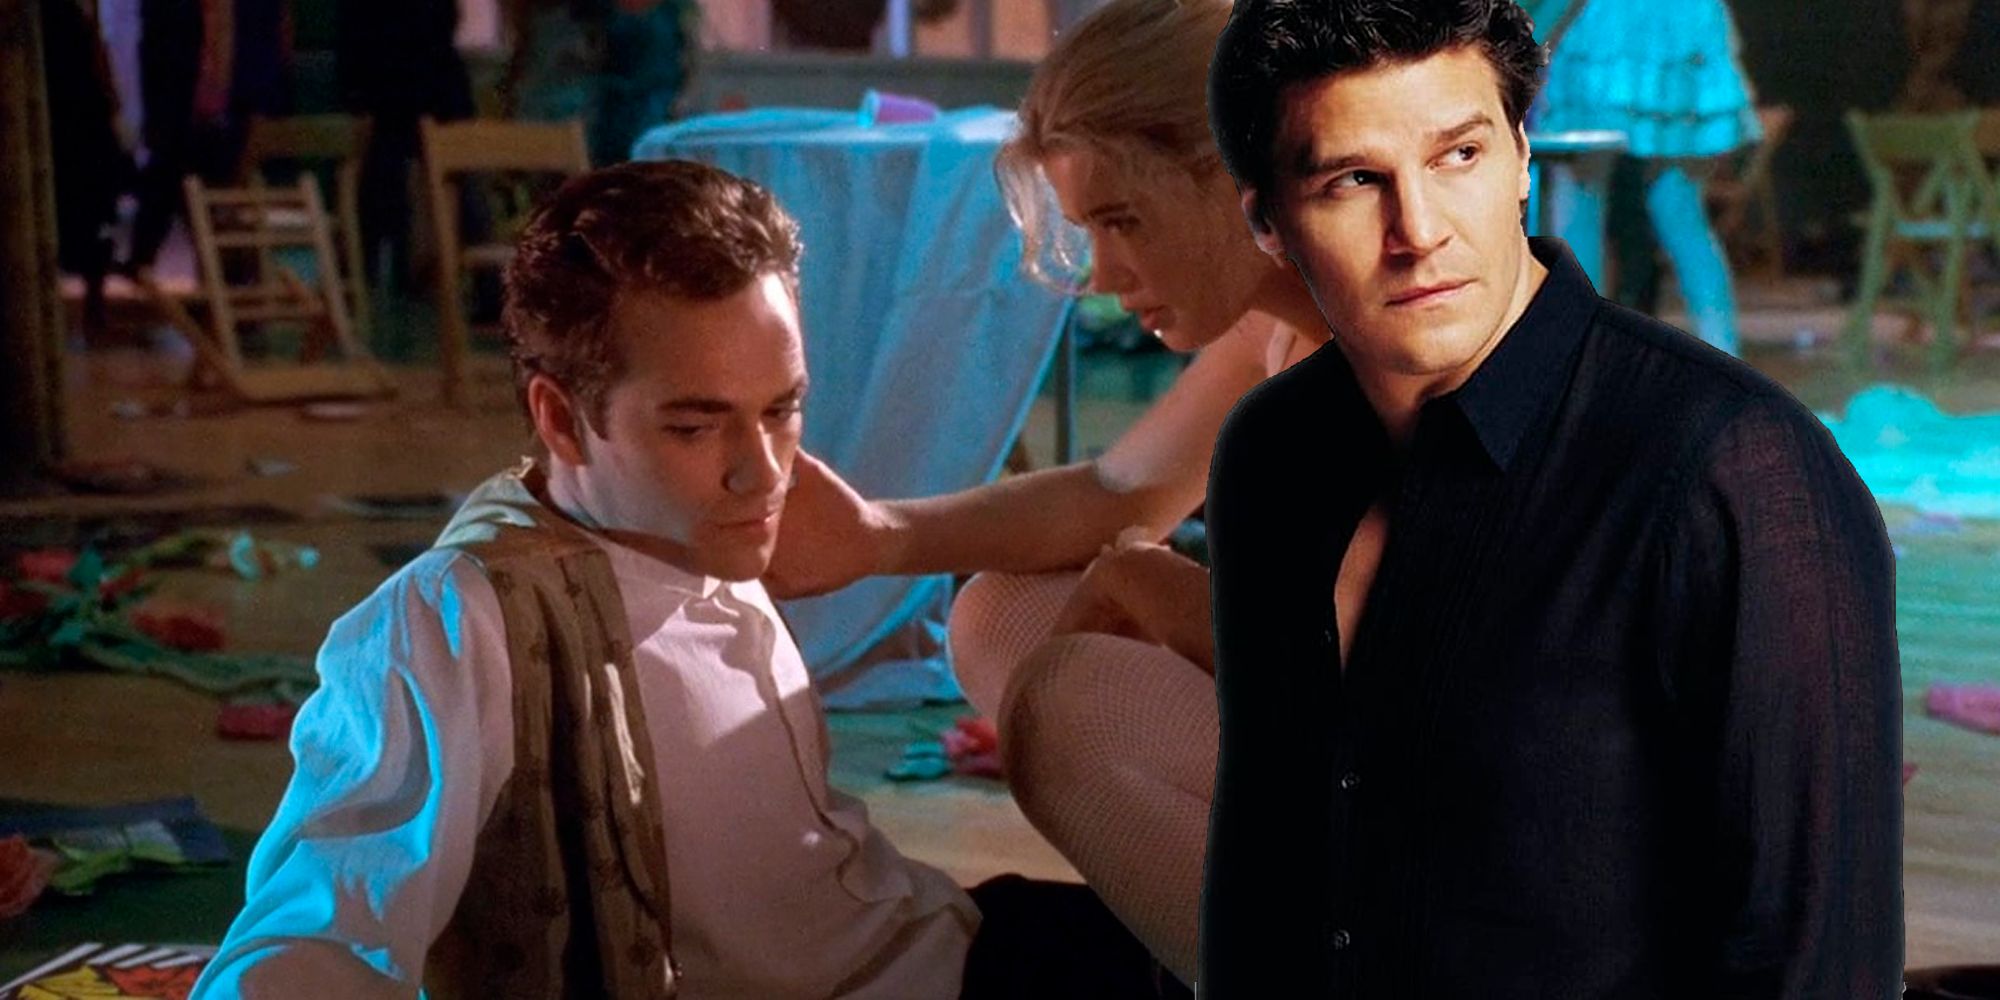 Kristy Swanson as Buffy and Luke Perry as Pike in Buffy the Vampire Slayer 1992 Movie and DavidBboreanaz as Angel